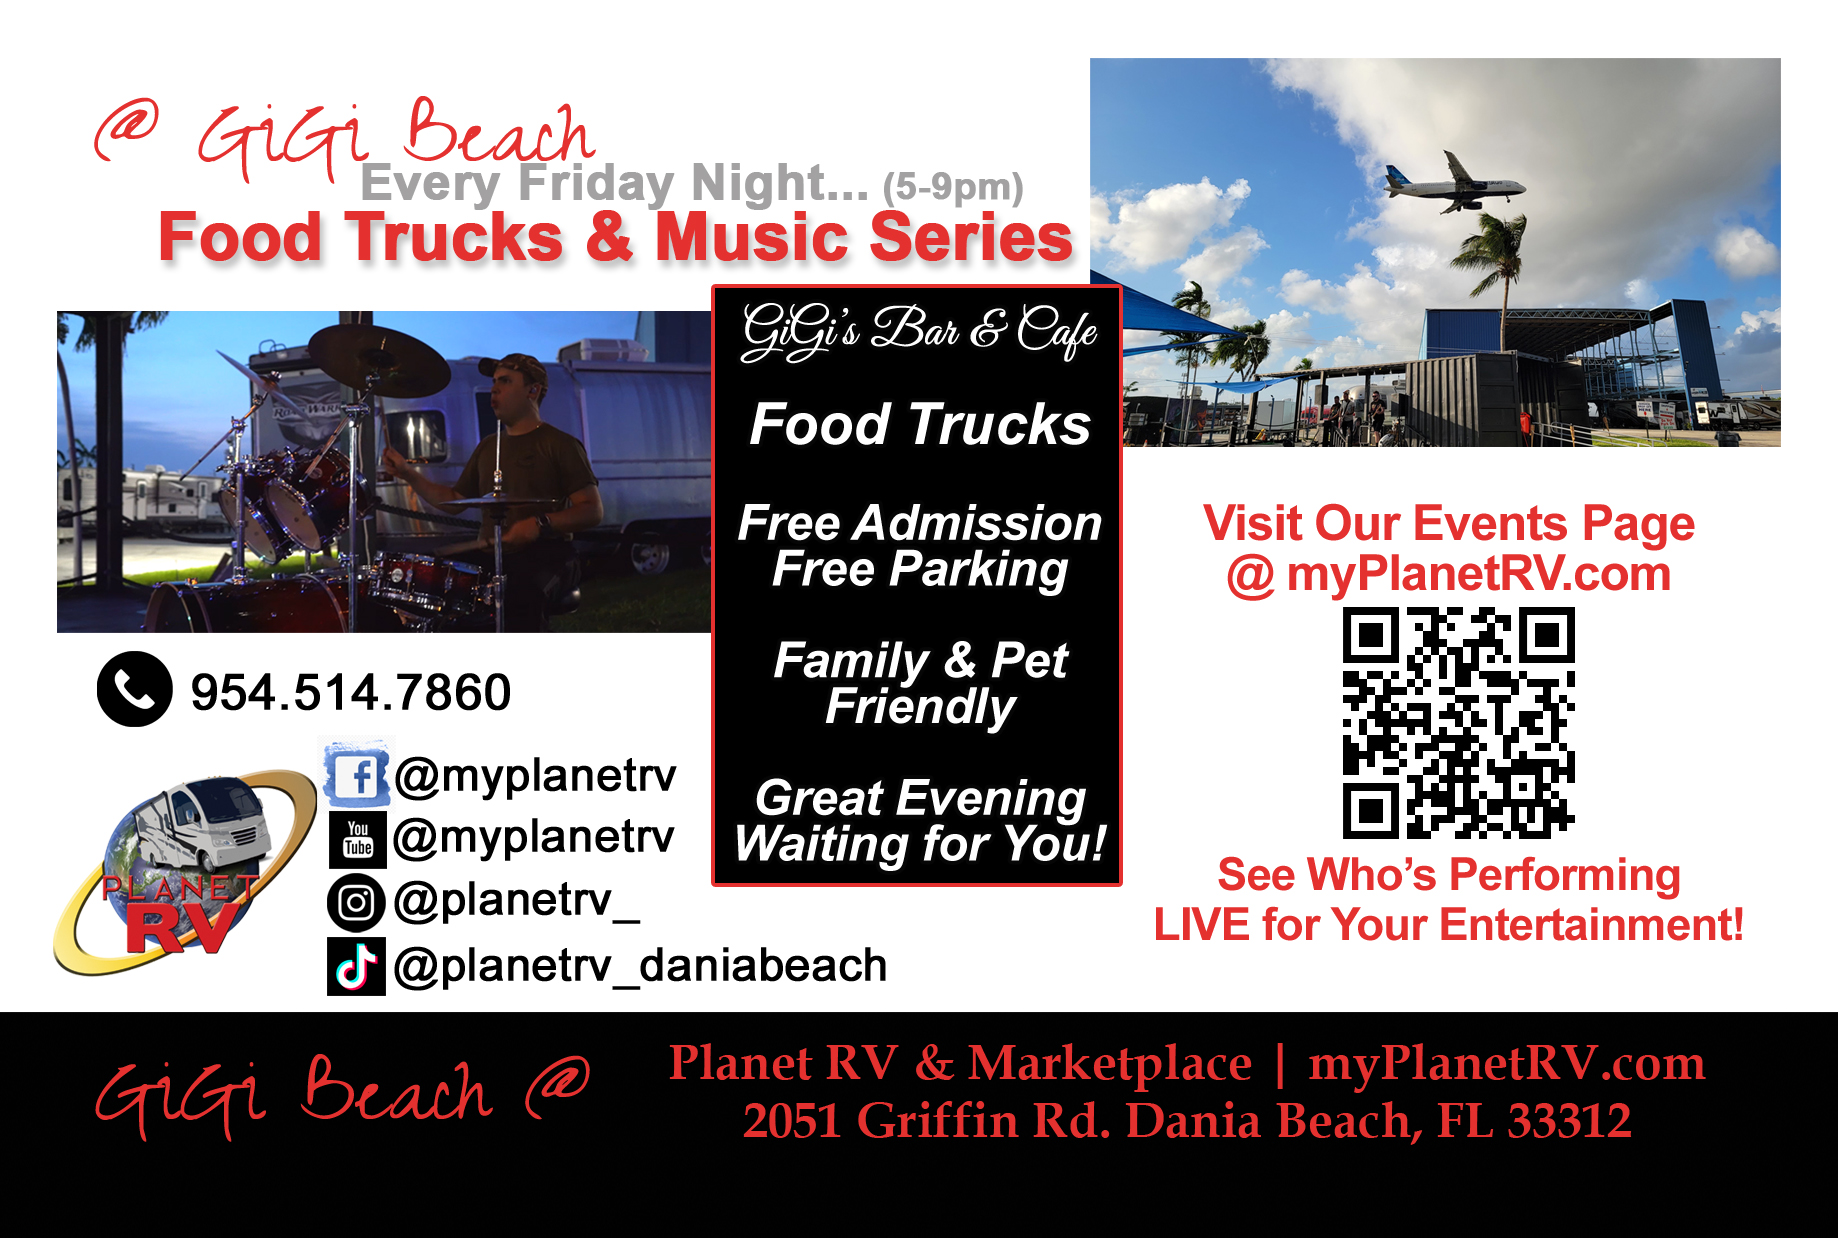 Food Trucks & Music Series Every Friday Night at Planet RV